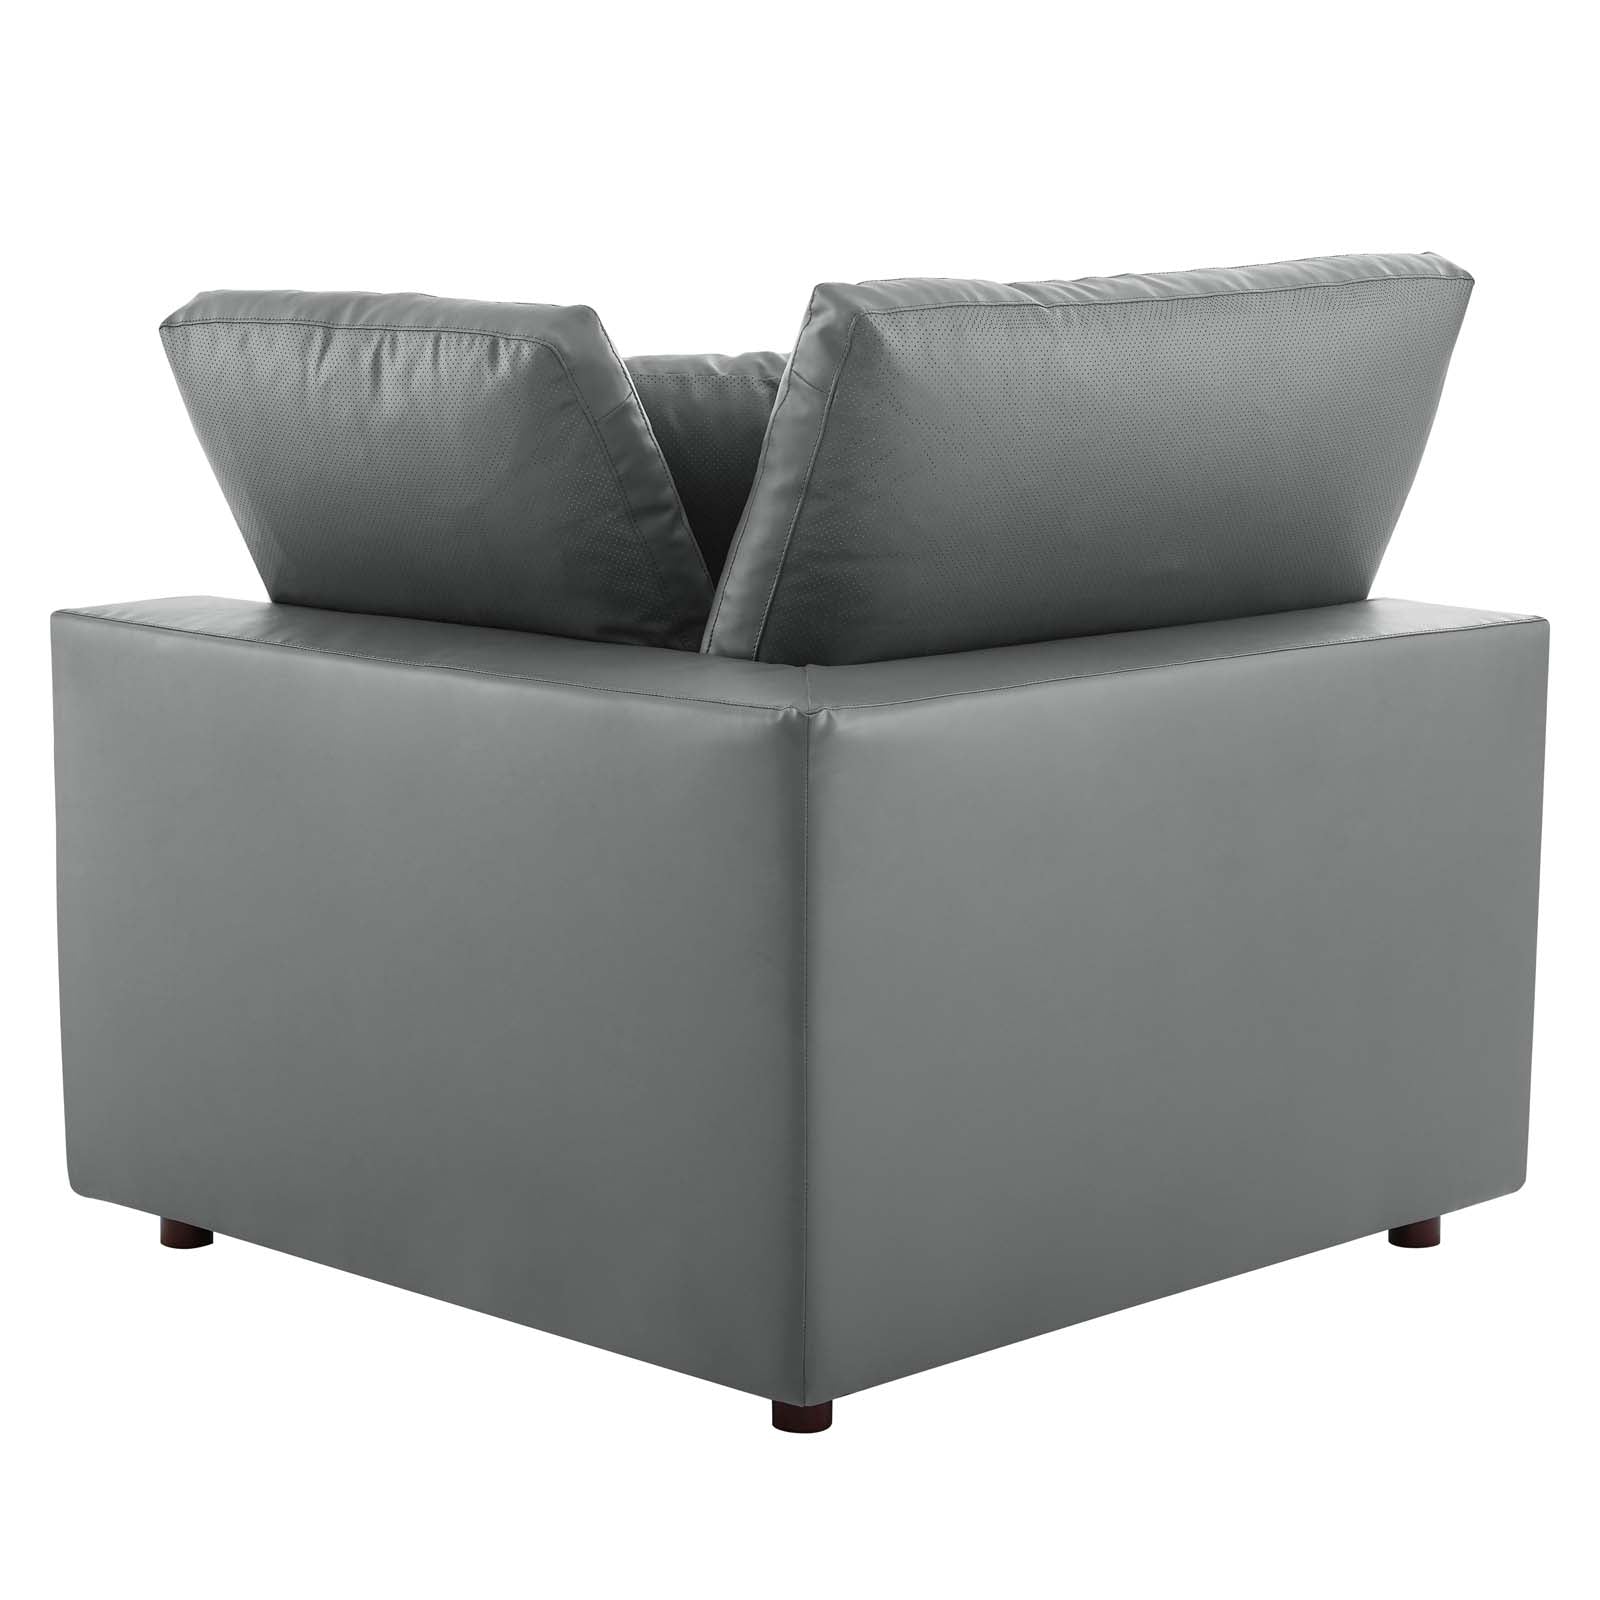 Modway Sofas & Couches - Commix Down Filled Overstuffed Vegan Leather 4 Seater Sofa Gray